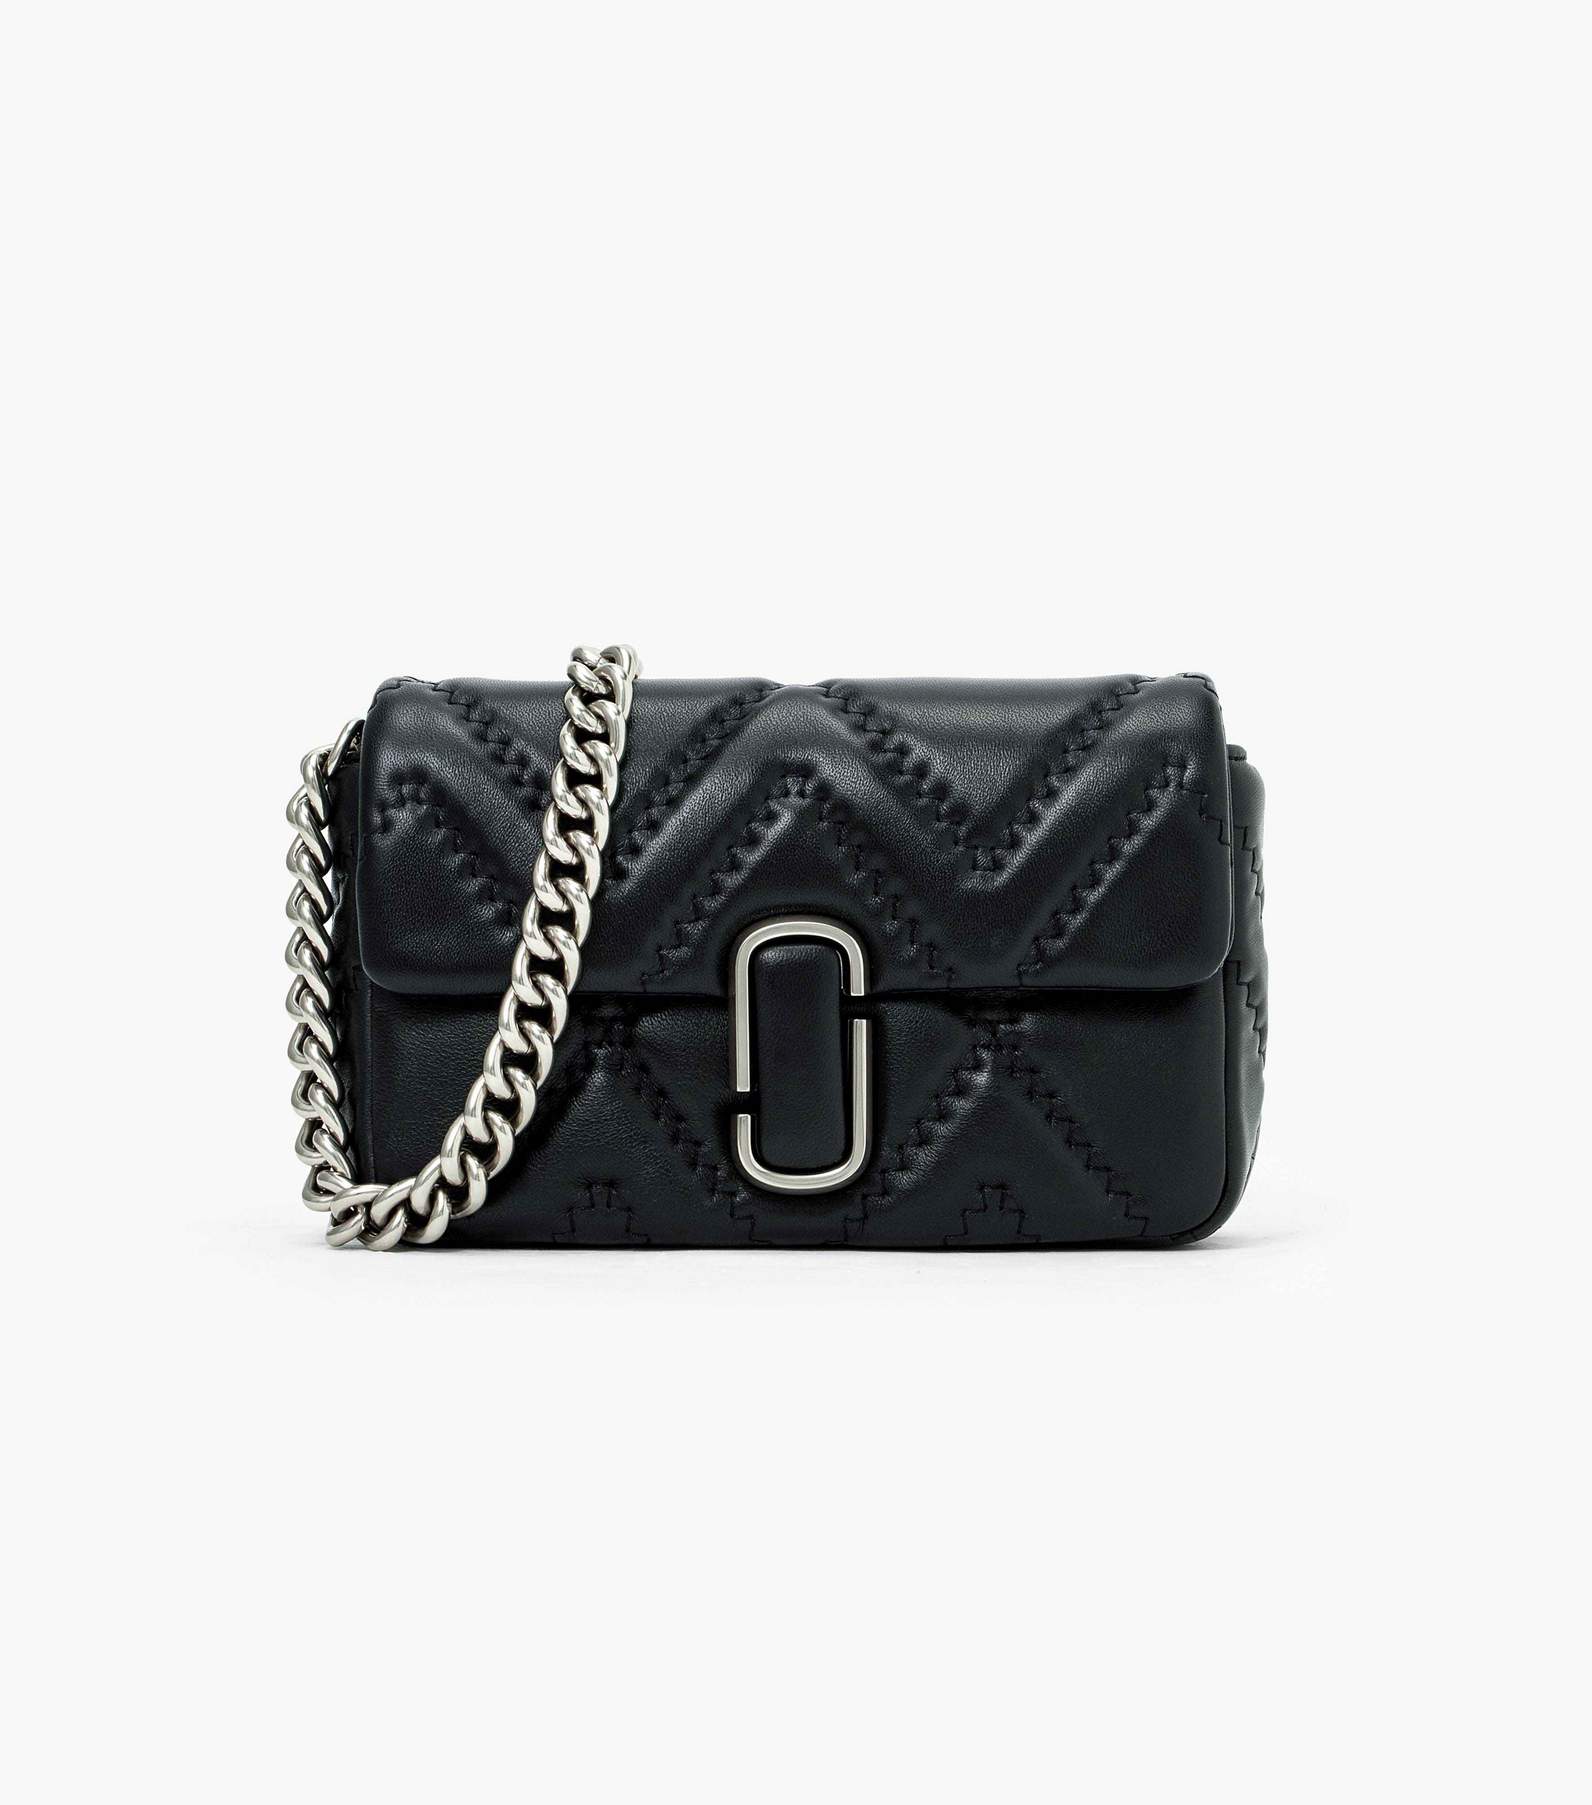 Black Leather Quilted Chain Shoulder Mini Bags Cellphone Pouch